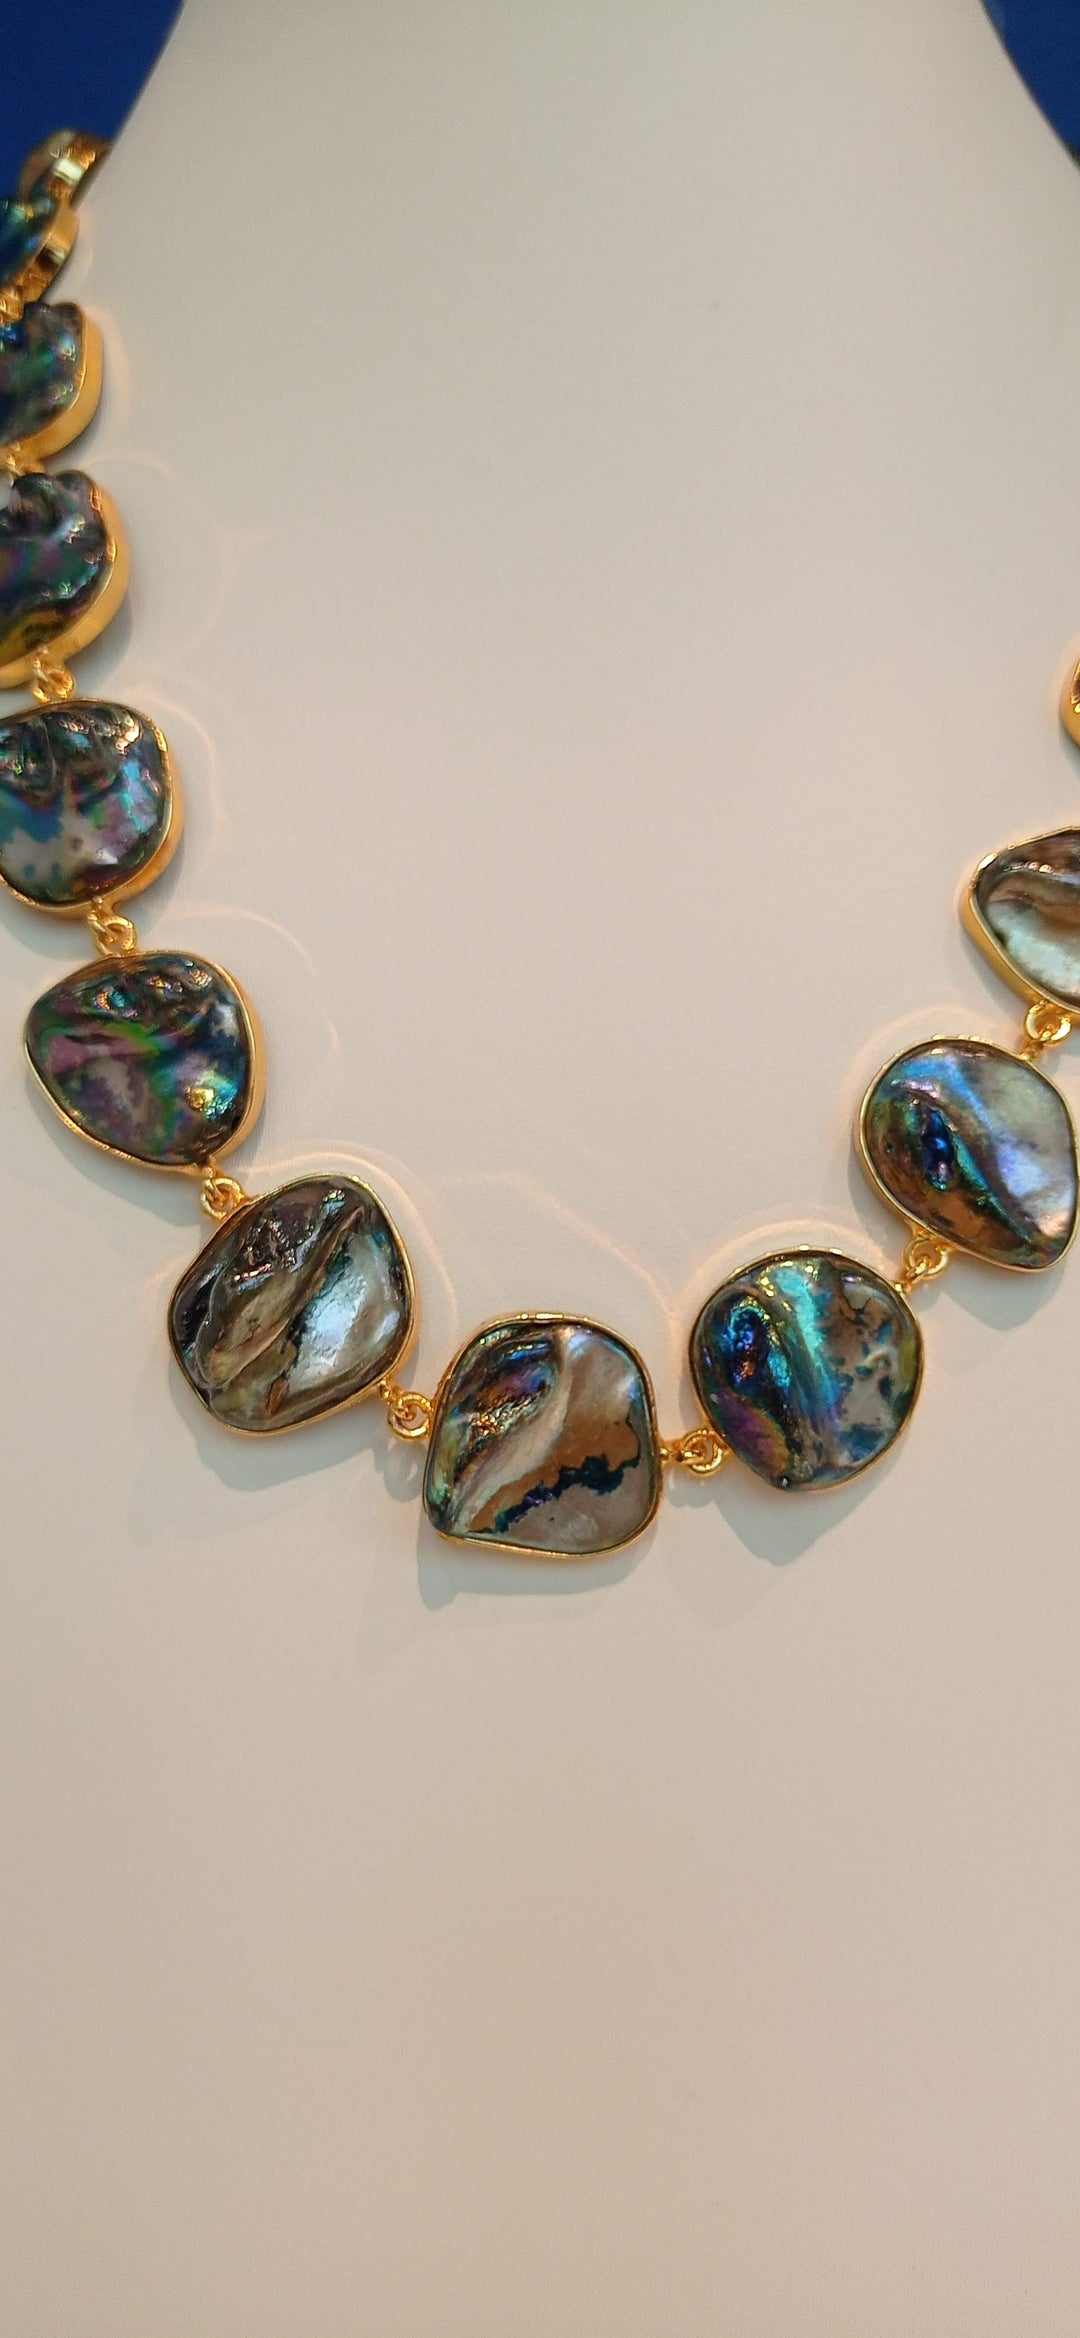 The "Olessia" Grey Opal Necklace and Earrings Set